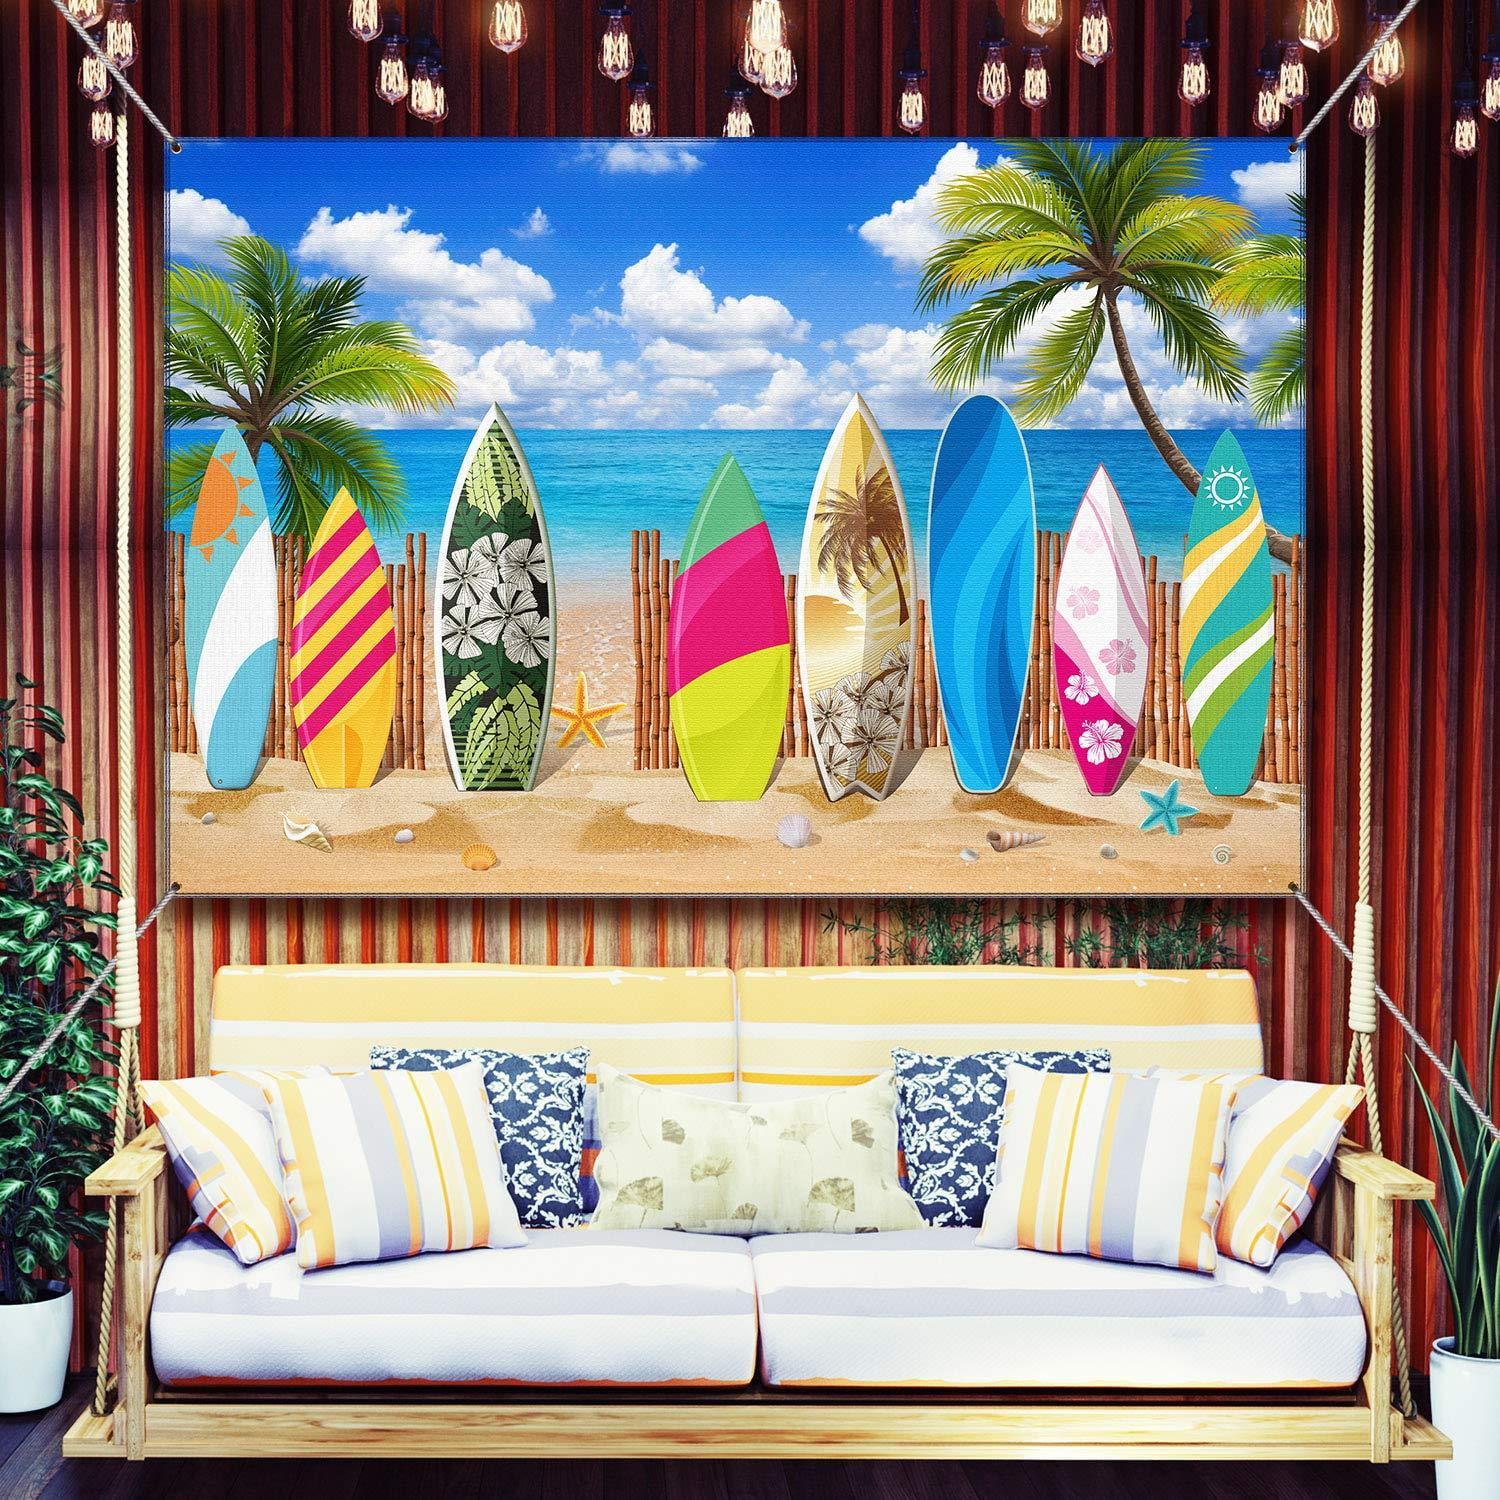 ALUONI 5x3ft Surfboard,Tropical Composition Cocktail Ice Cream Floral Elements and Backdrop for Selfie Birthday Party Pictures Photo Dance Decor Wedding Studio Background AM030621